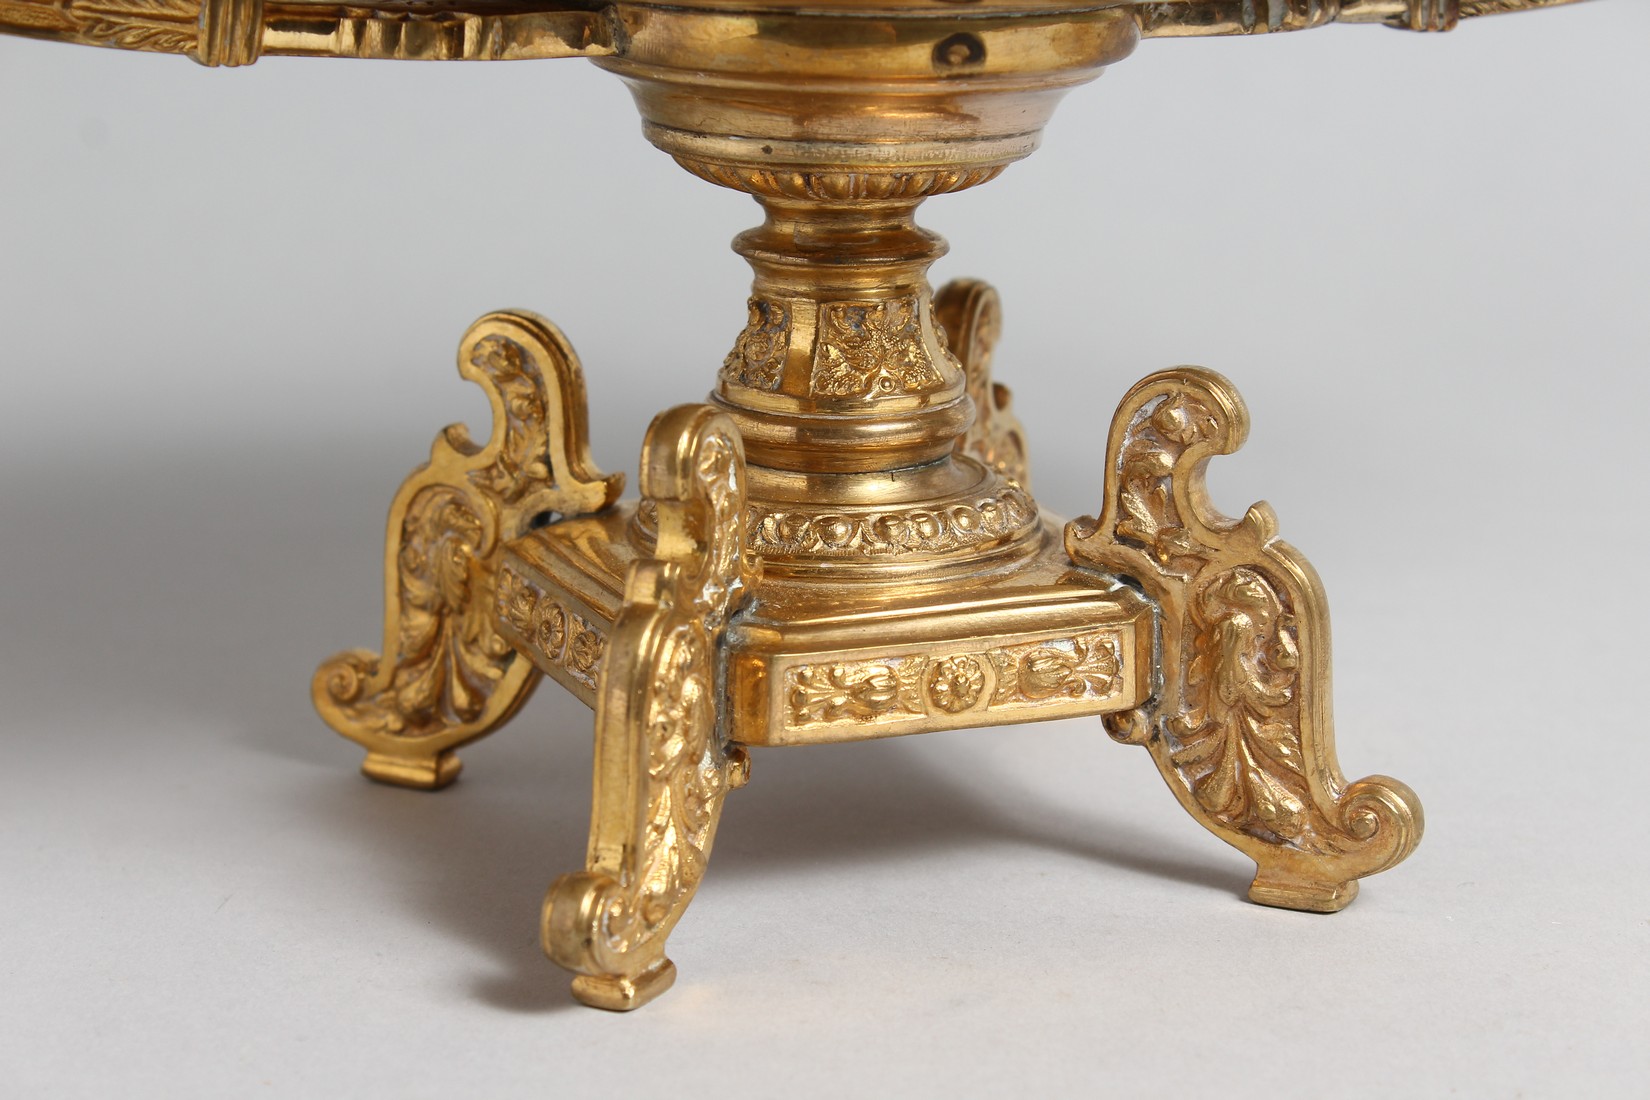 A DECORATIVE CLASSICAL STYLE GILT BRONZE TWIN HANDLED PEDESTAL OVAL SHAPE BOWL. 15.5ins high. - Image 2 of 4